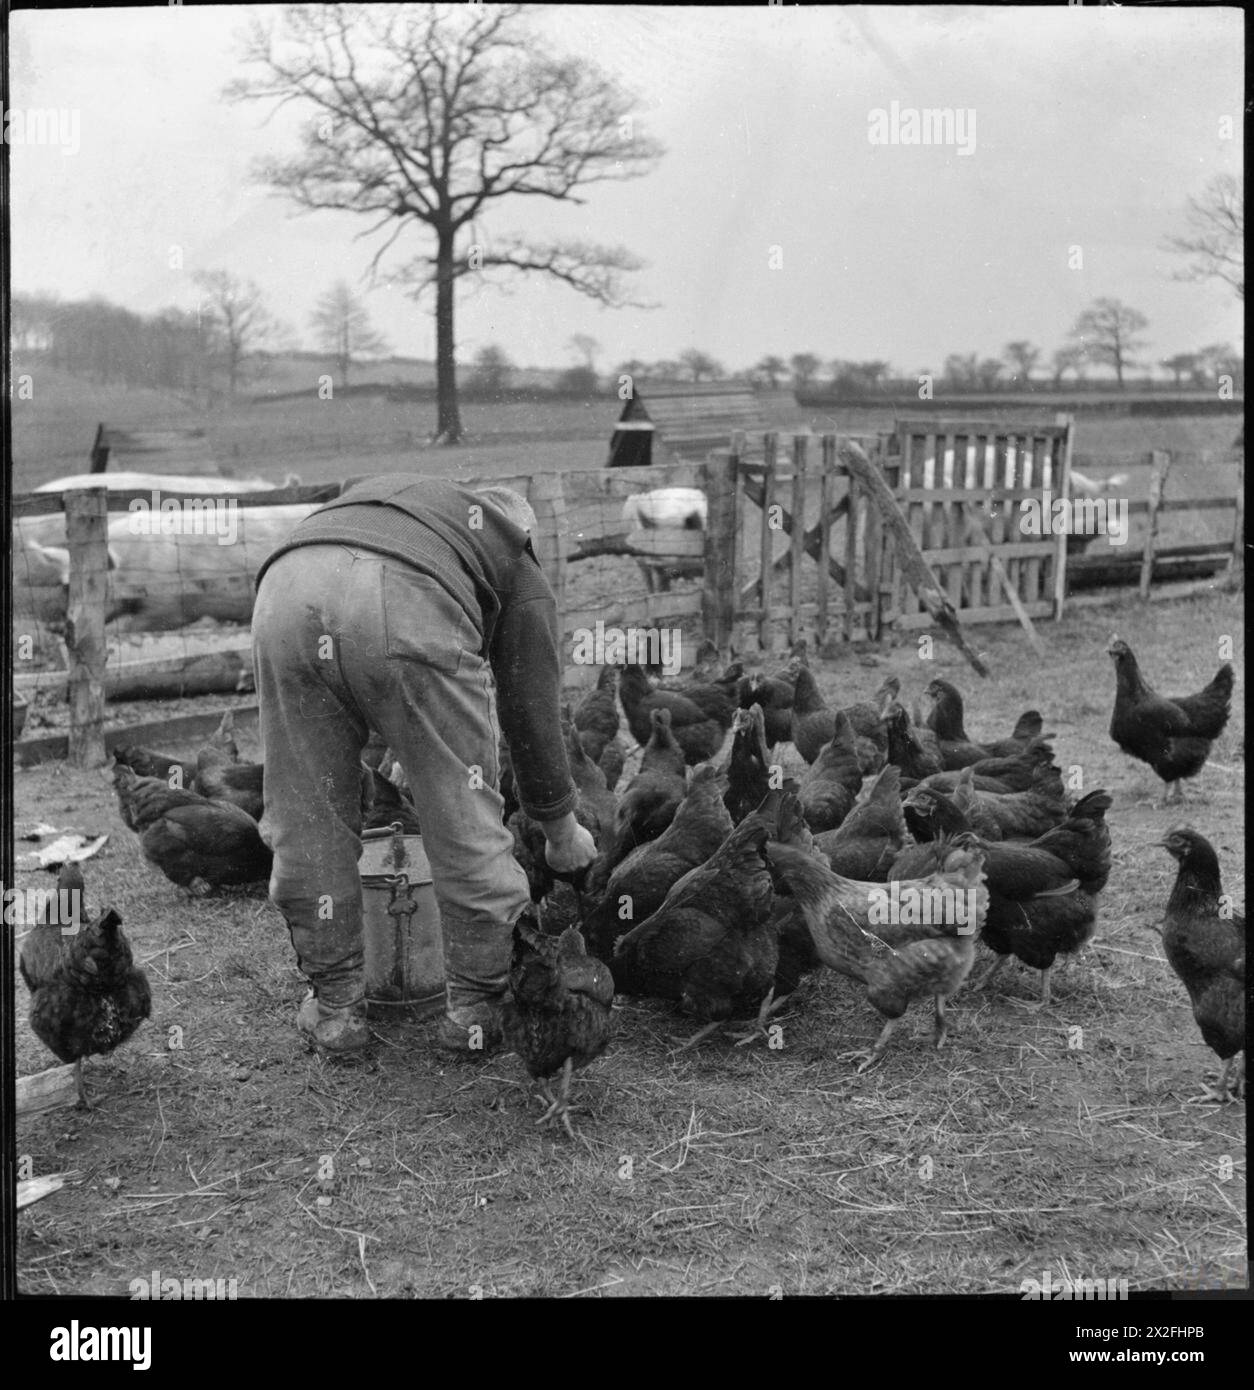 WAKEFIELD TRAINING PRISON AND CAMP: EVERYDAY LIFE IN A BRITISH PRISON, WAKEFIELD, YORKSHIRE, ENGLAND, 1944 - At the camp attached to Wakefield Training Prison, an inmate feeds the chickens kept on once derelict farmland at the prison. The camp is largely self-supporting Stock Photo